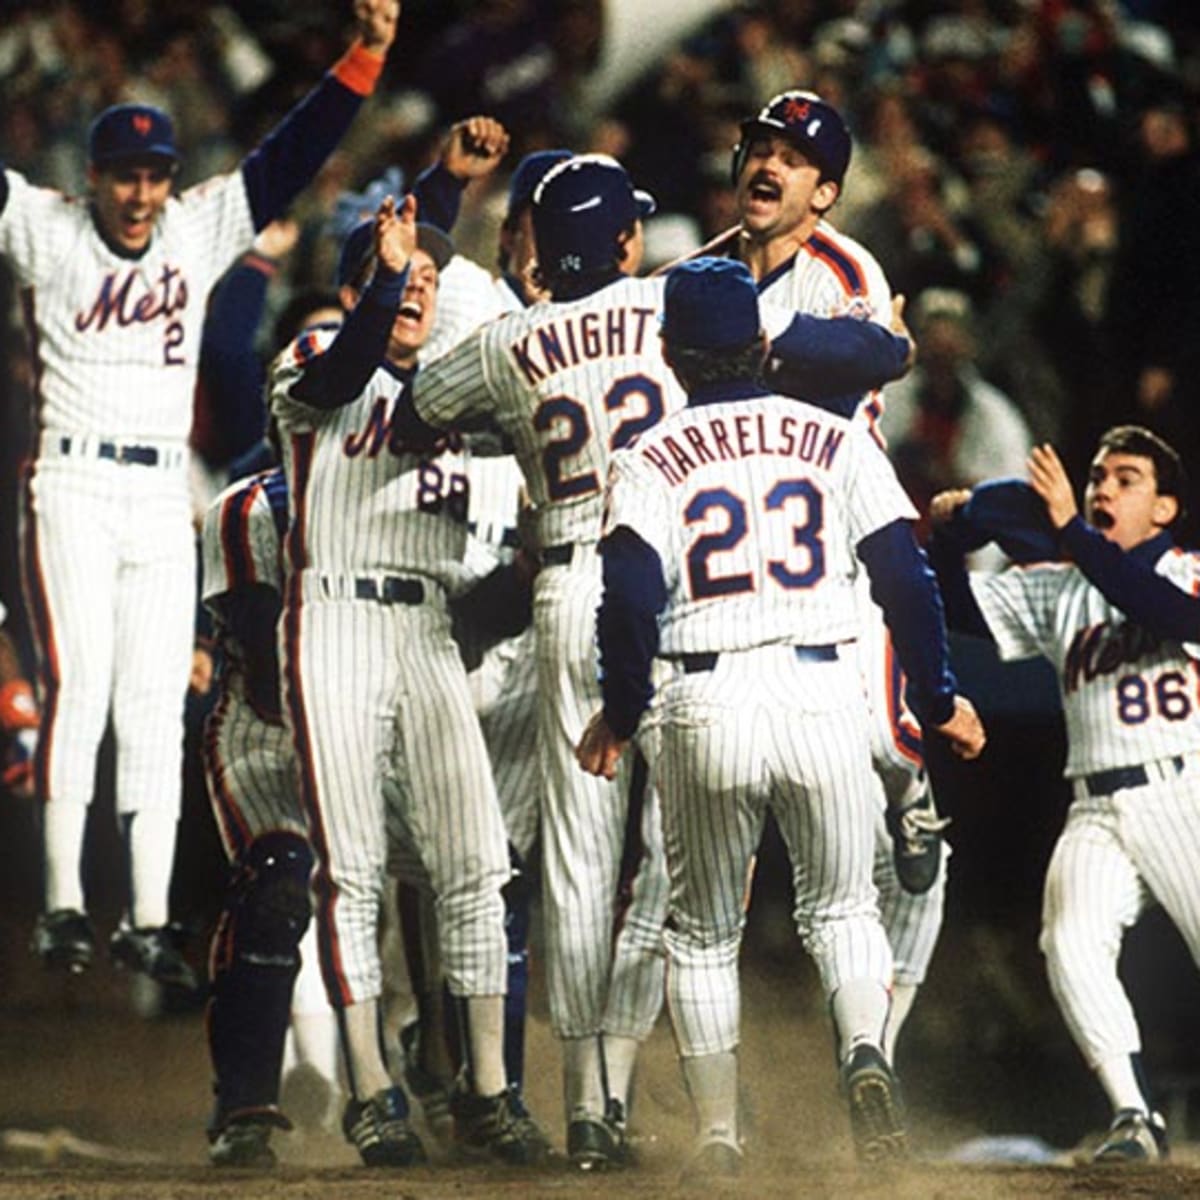 Most memorable moments from 1986 Mets season